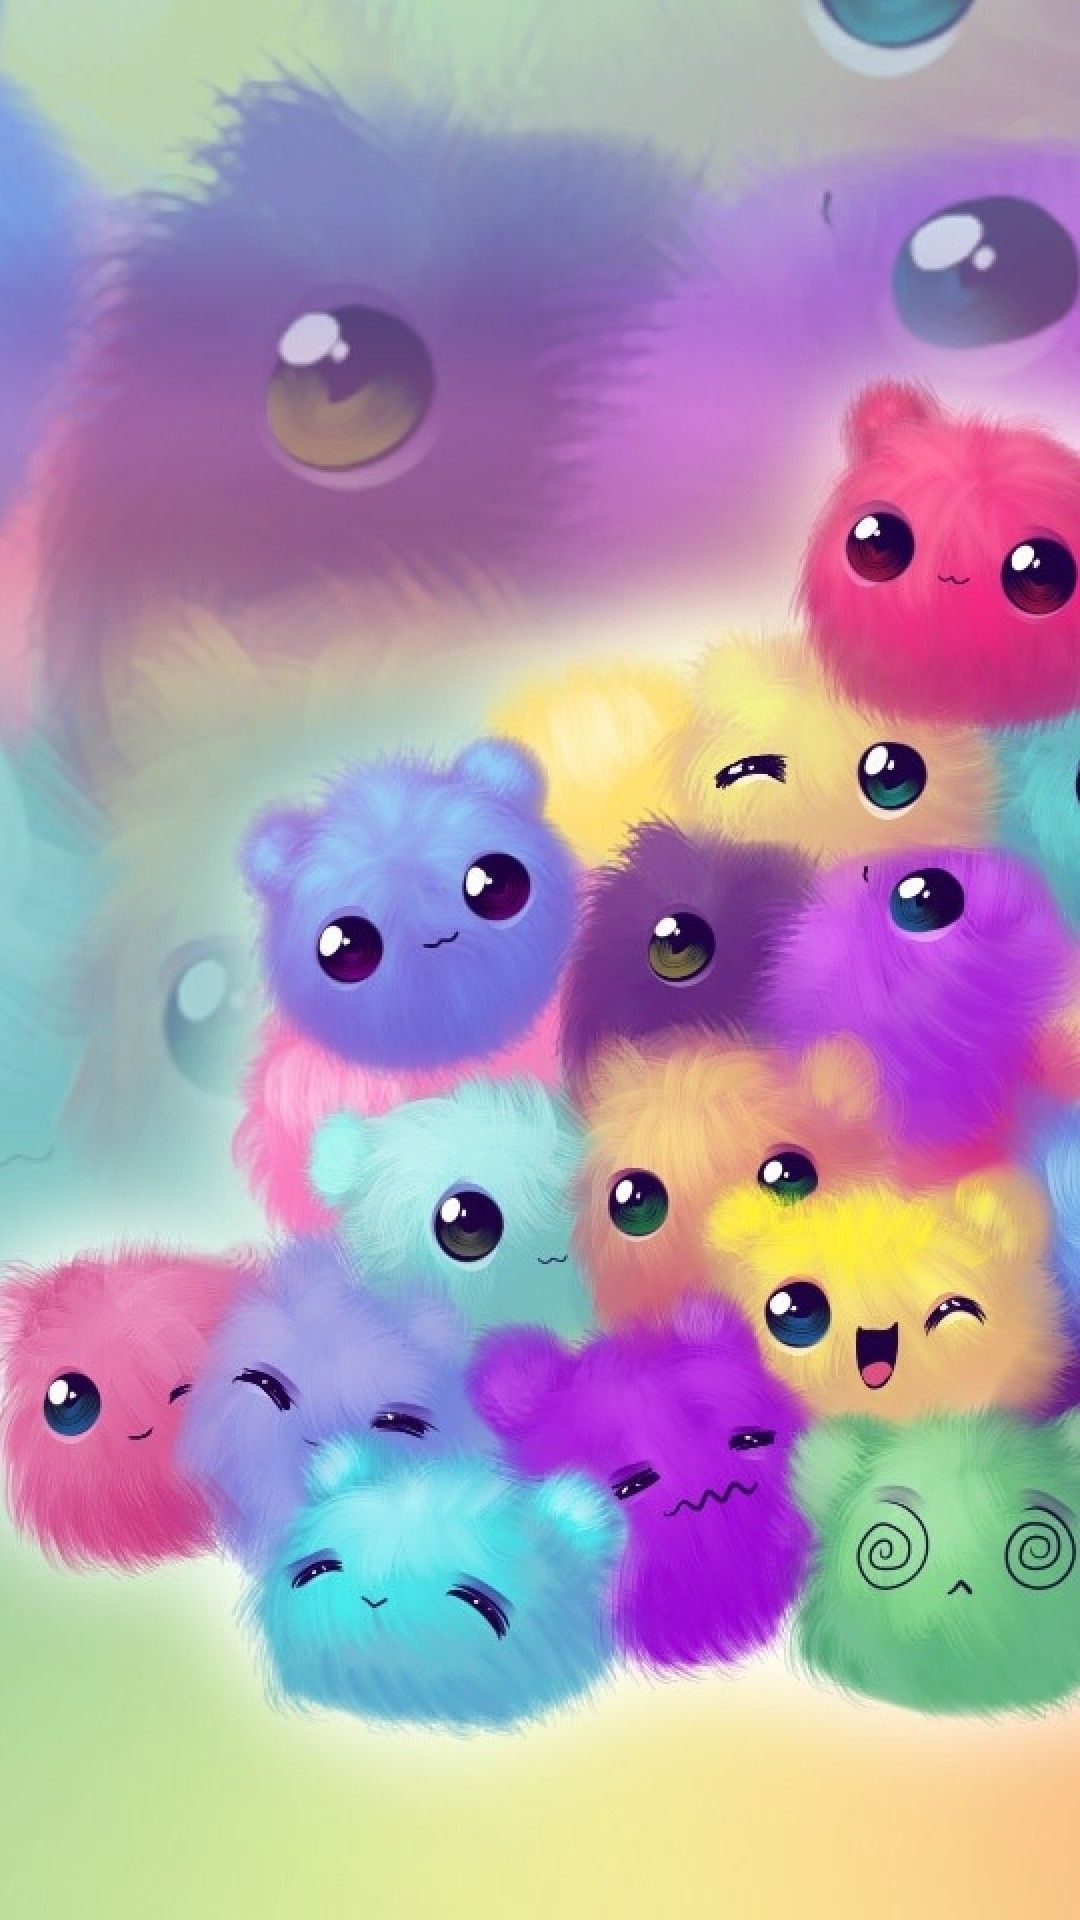 Download Free Android Wallpaper Cute - 4376 - MobileSMSPK.net